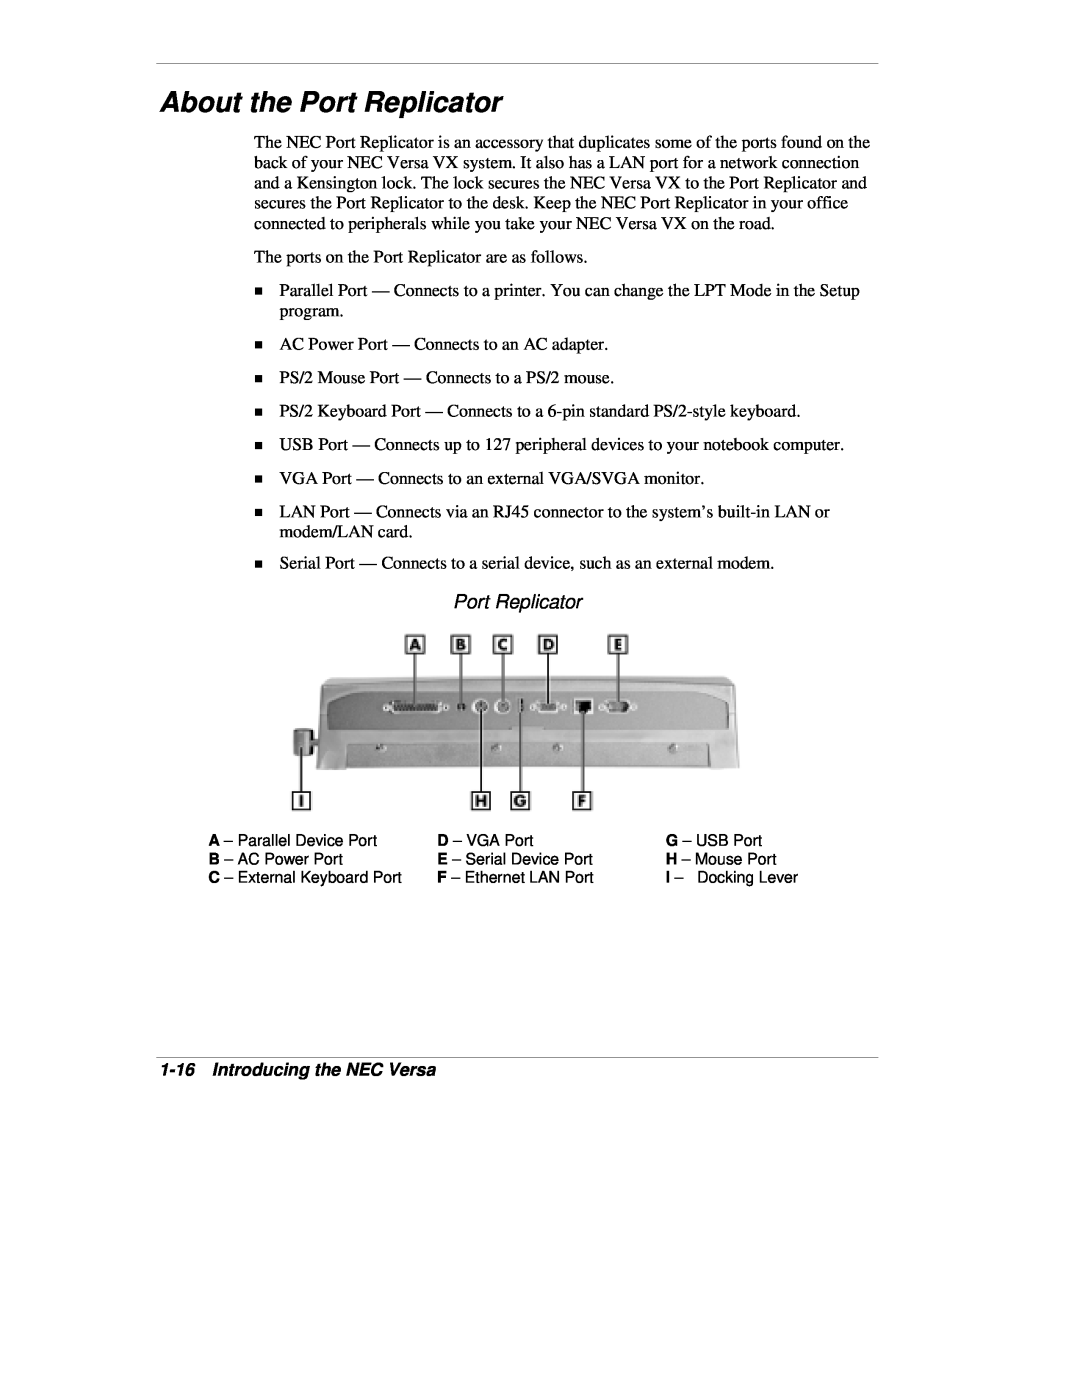 NEC VX manual About the Port Replicator, Introducing the NEC Versa 